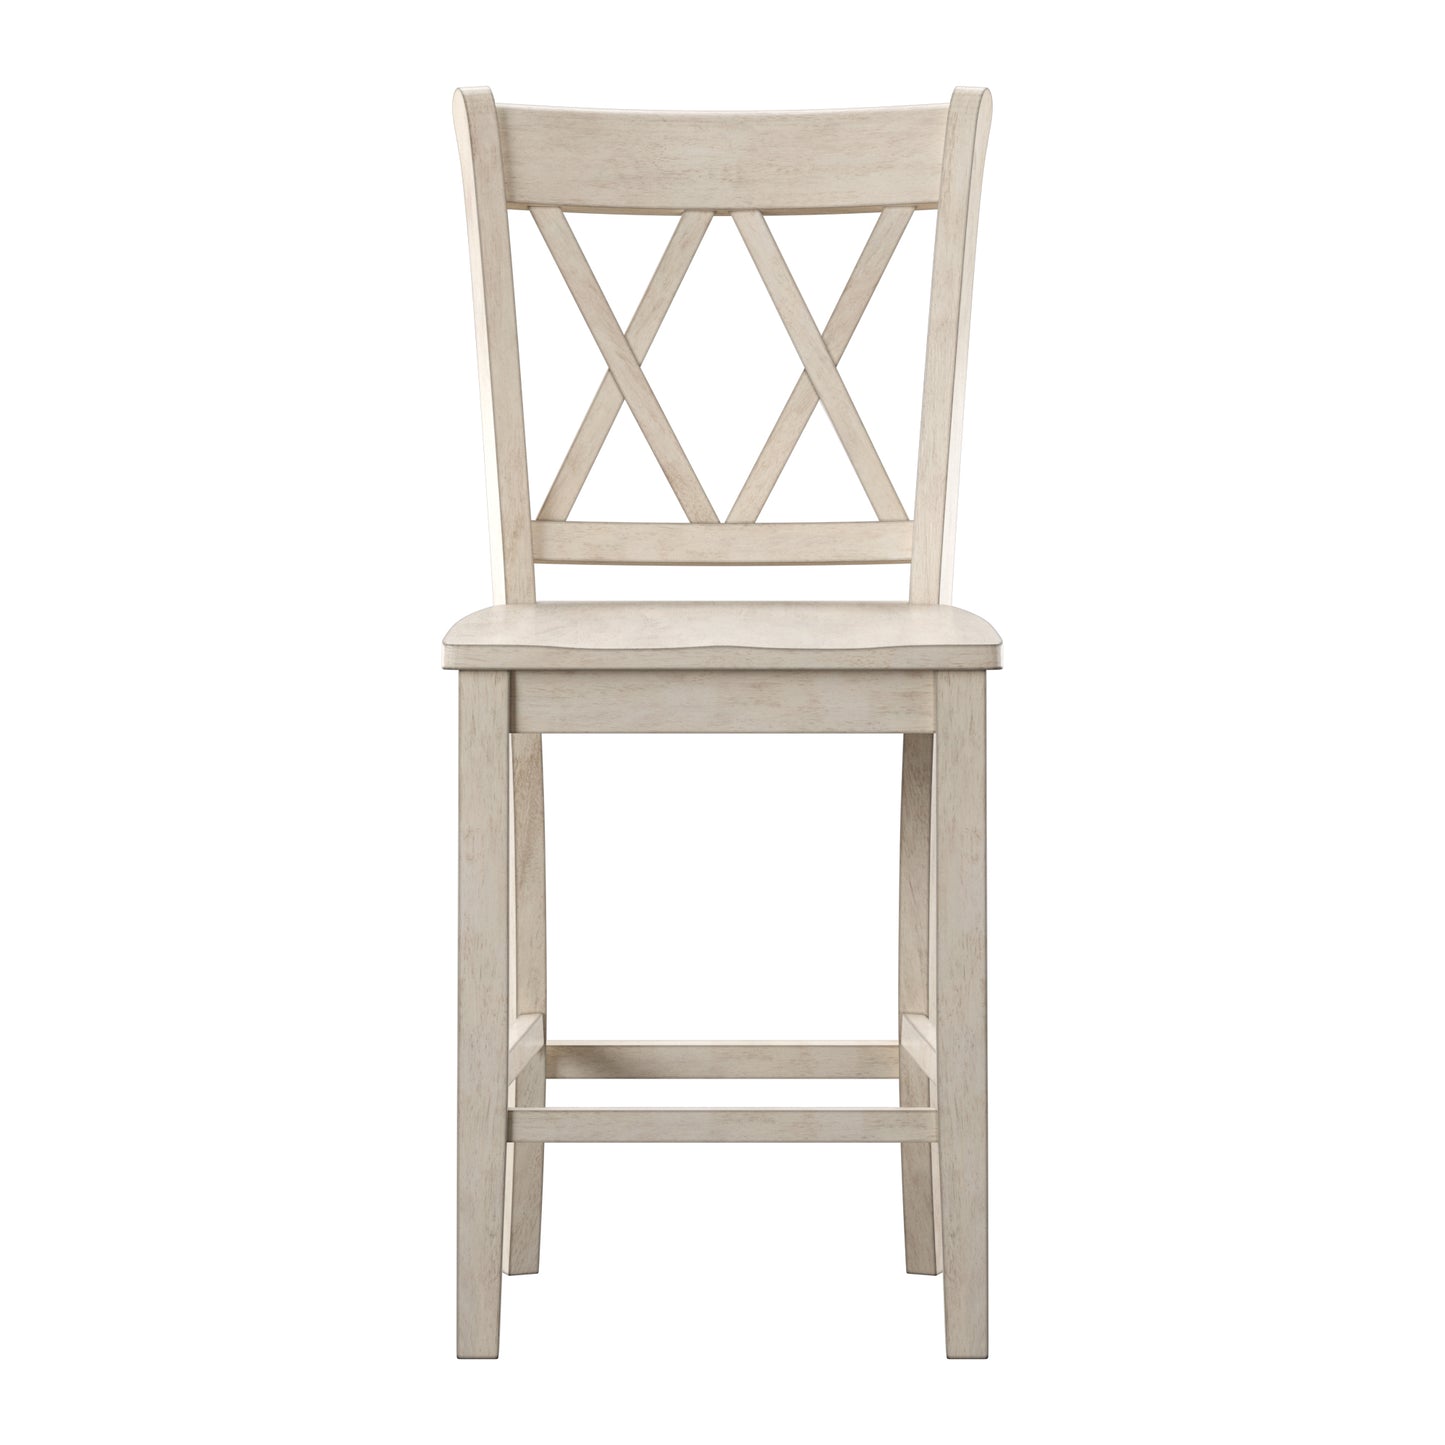 Double X-Back Counter Height Chairs (Set of 2) - Antique White Finish